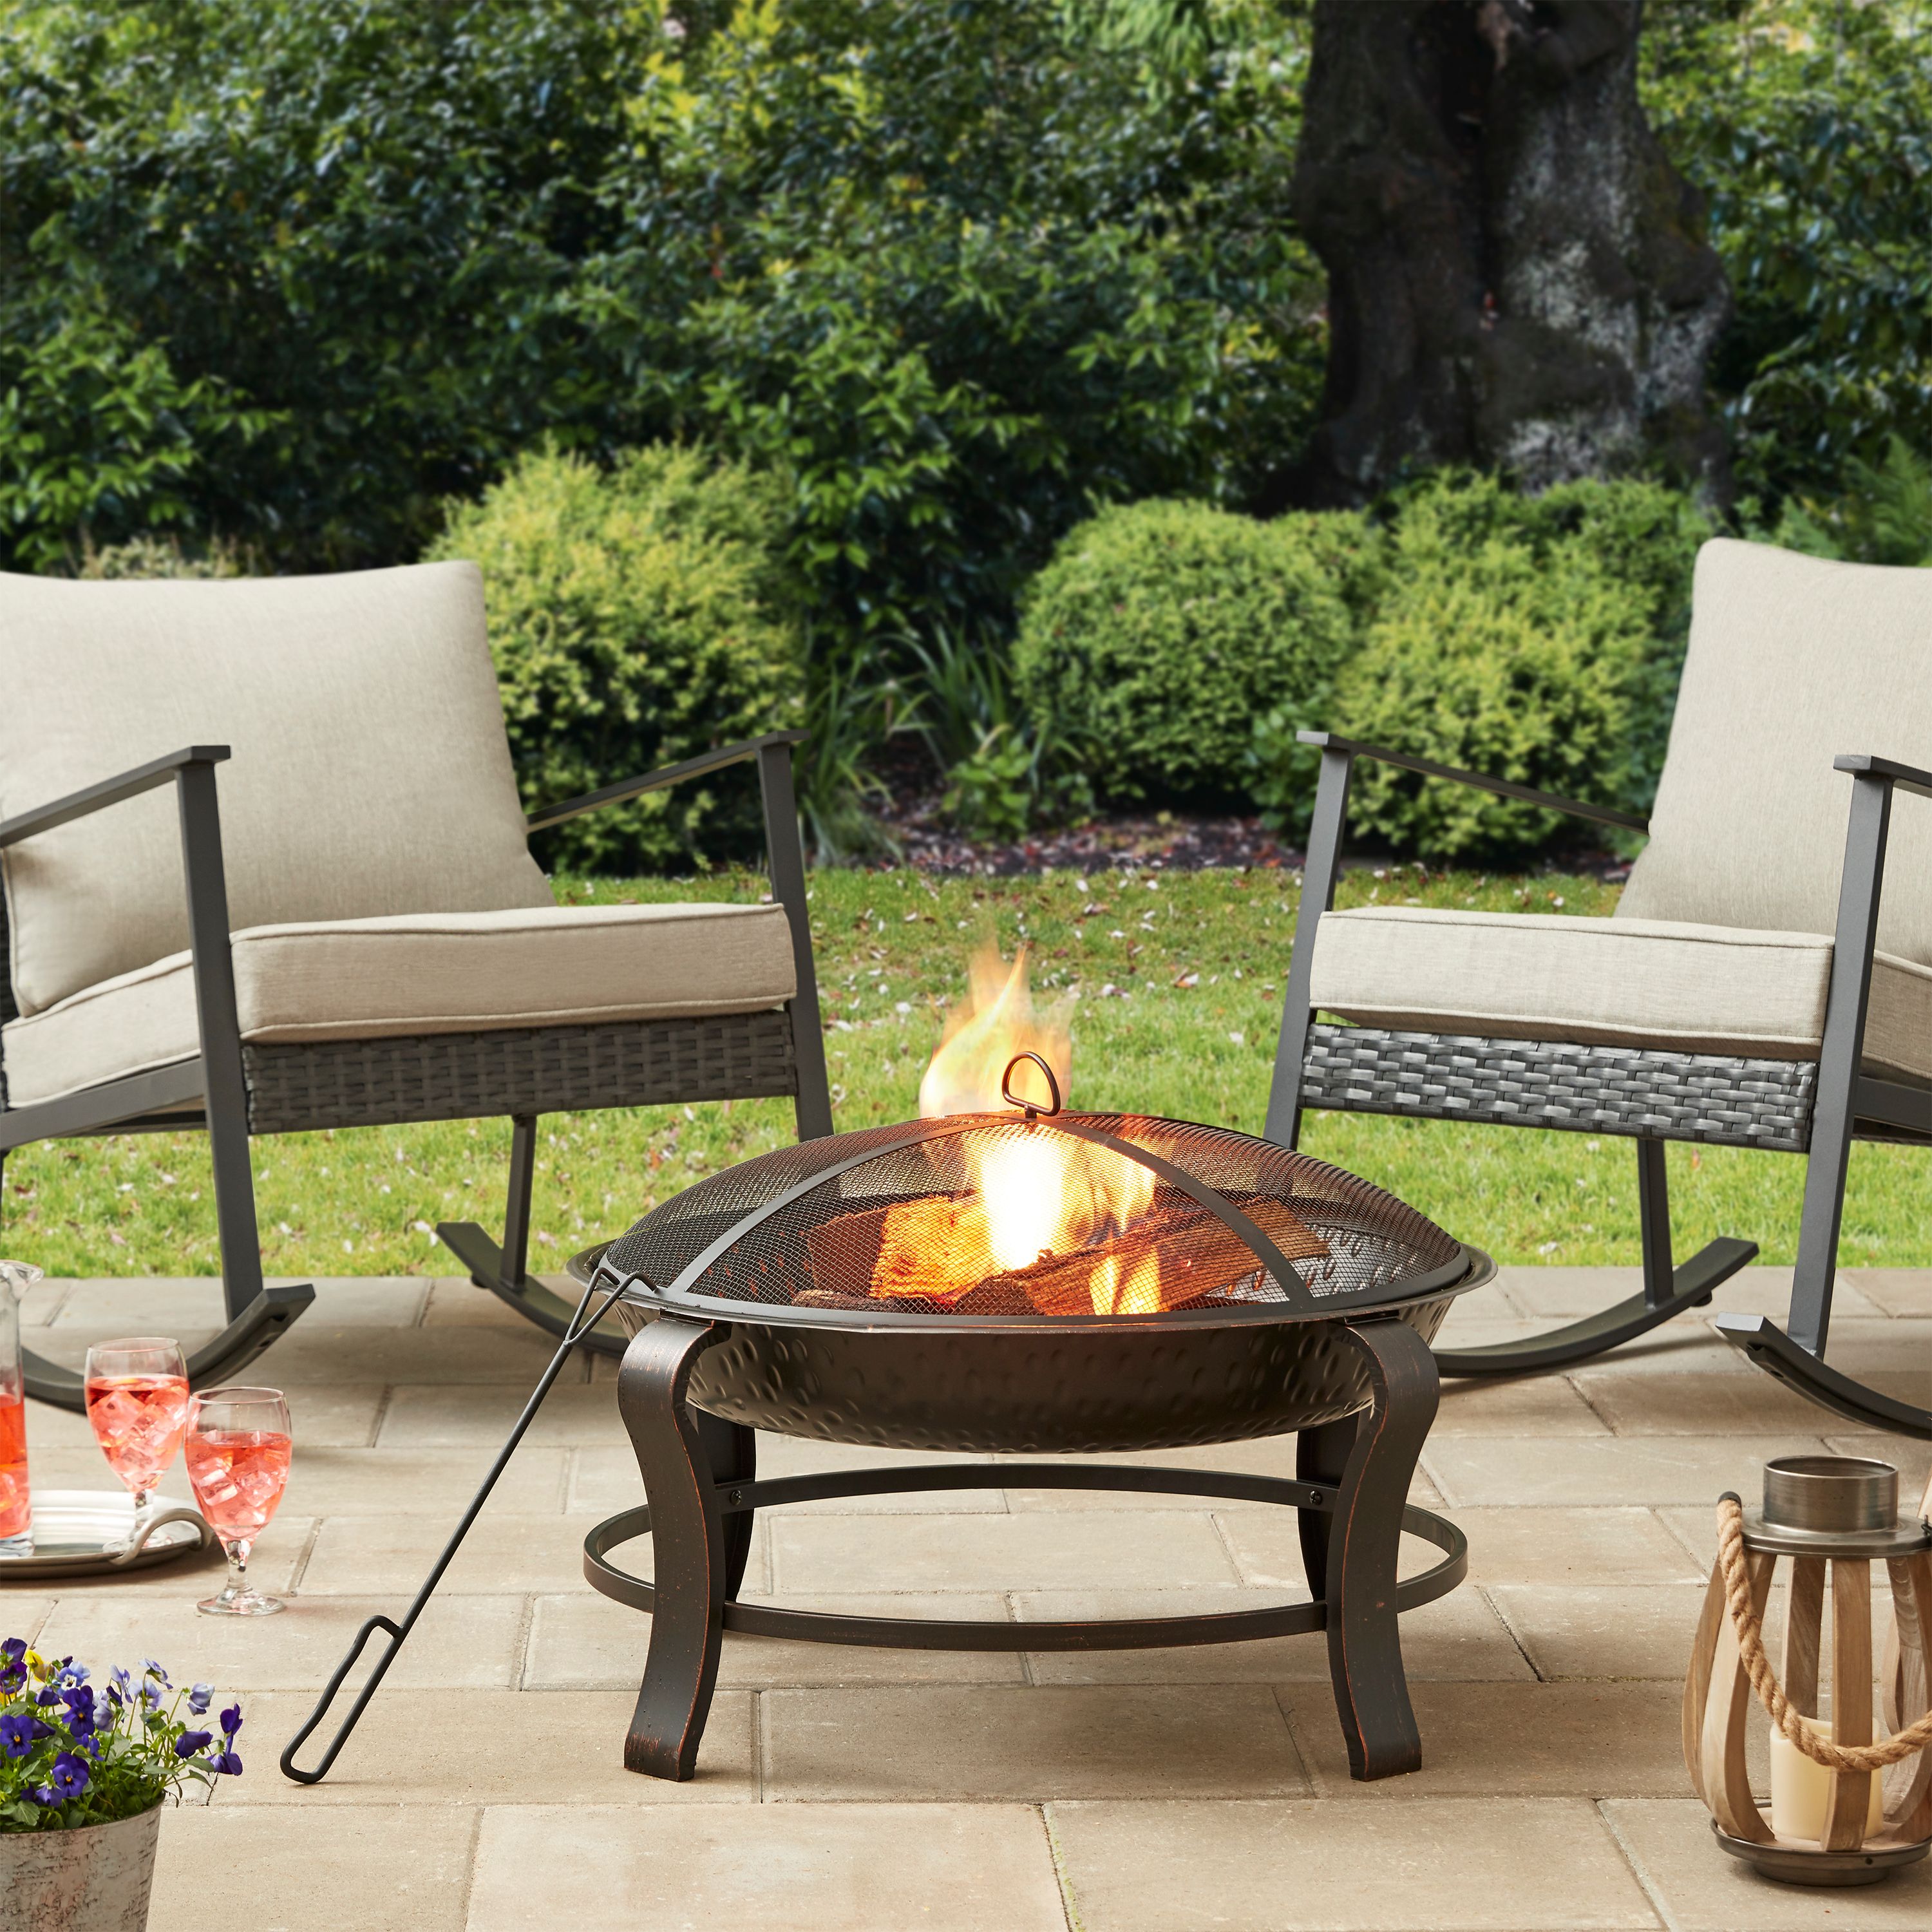 Walmart S Fall Patio Picks See Bestselling Seating Lighting Fire Pits More Mlive Com